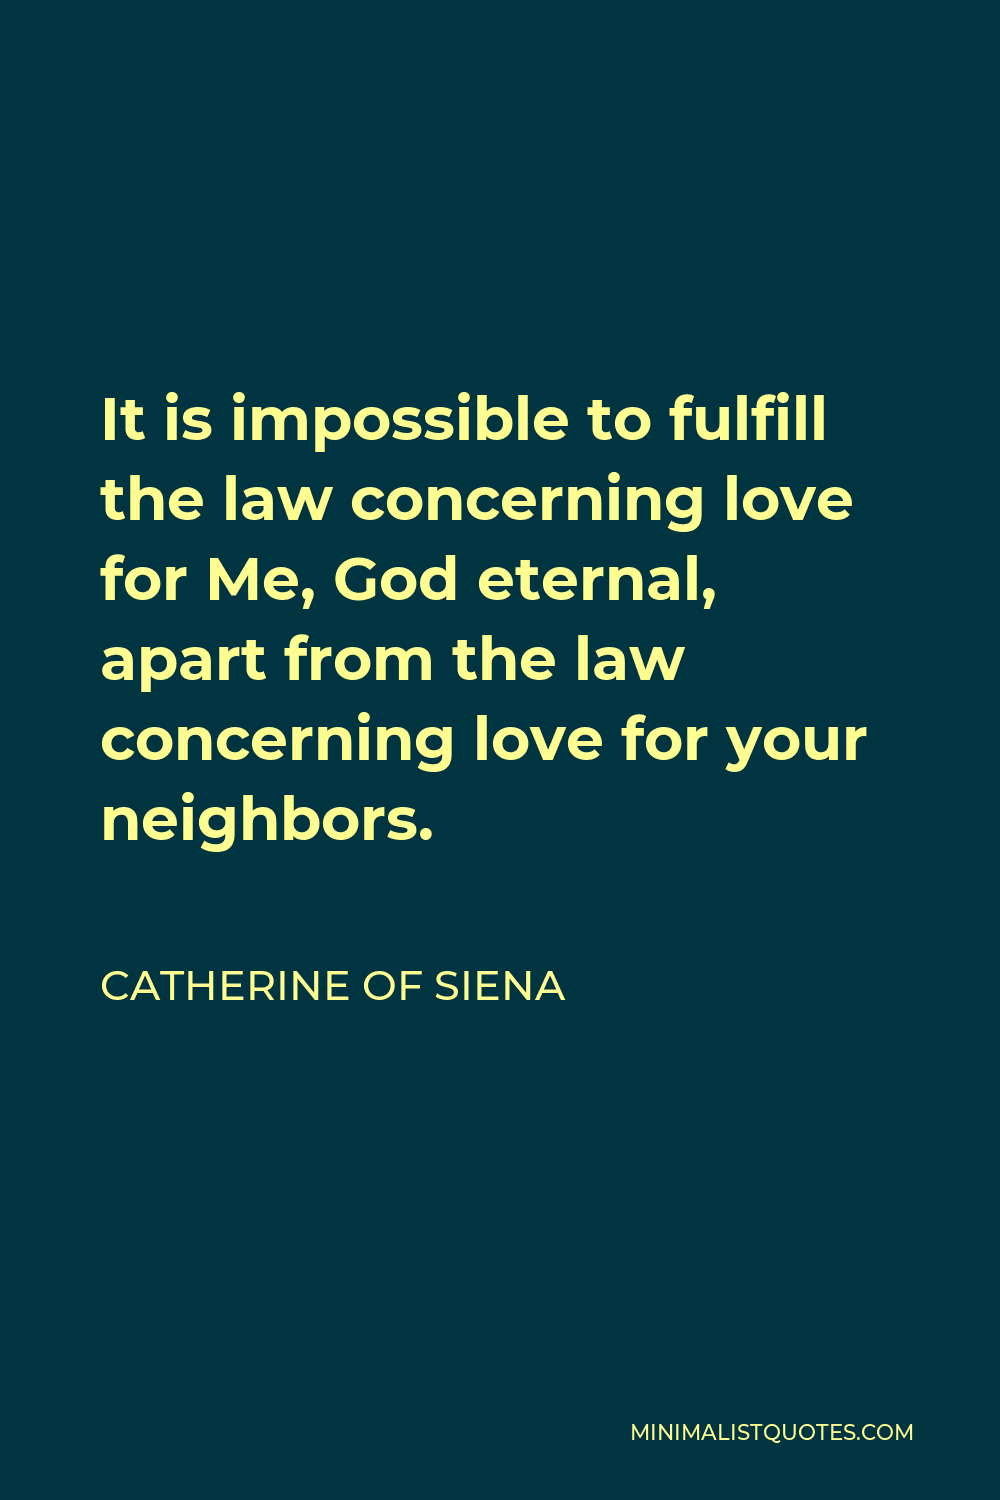 Catherine of Siena Quote - It is impossible to fulfill the law concerning love for Me, God eternal, apart from the law concerning love for your neighbors.